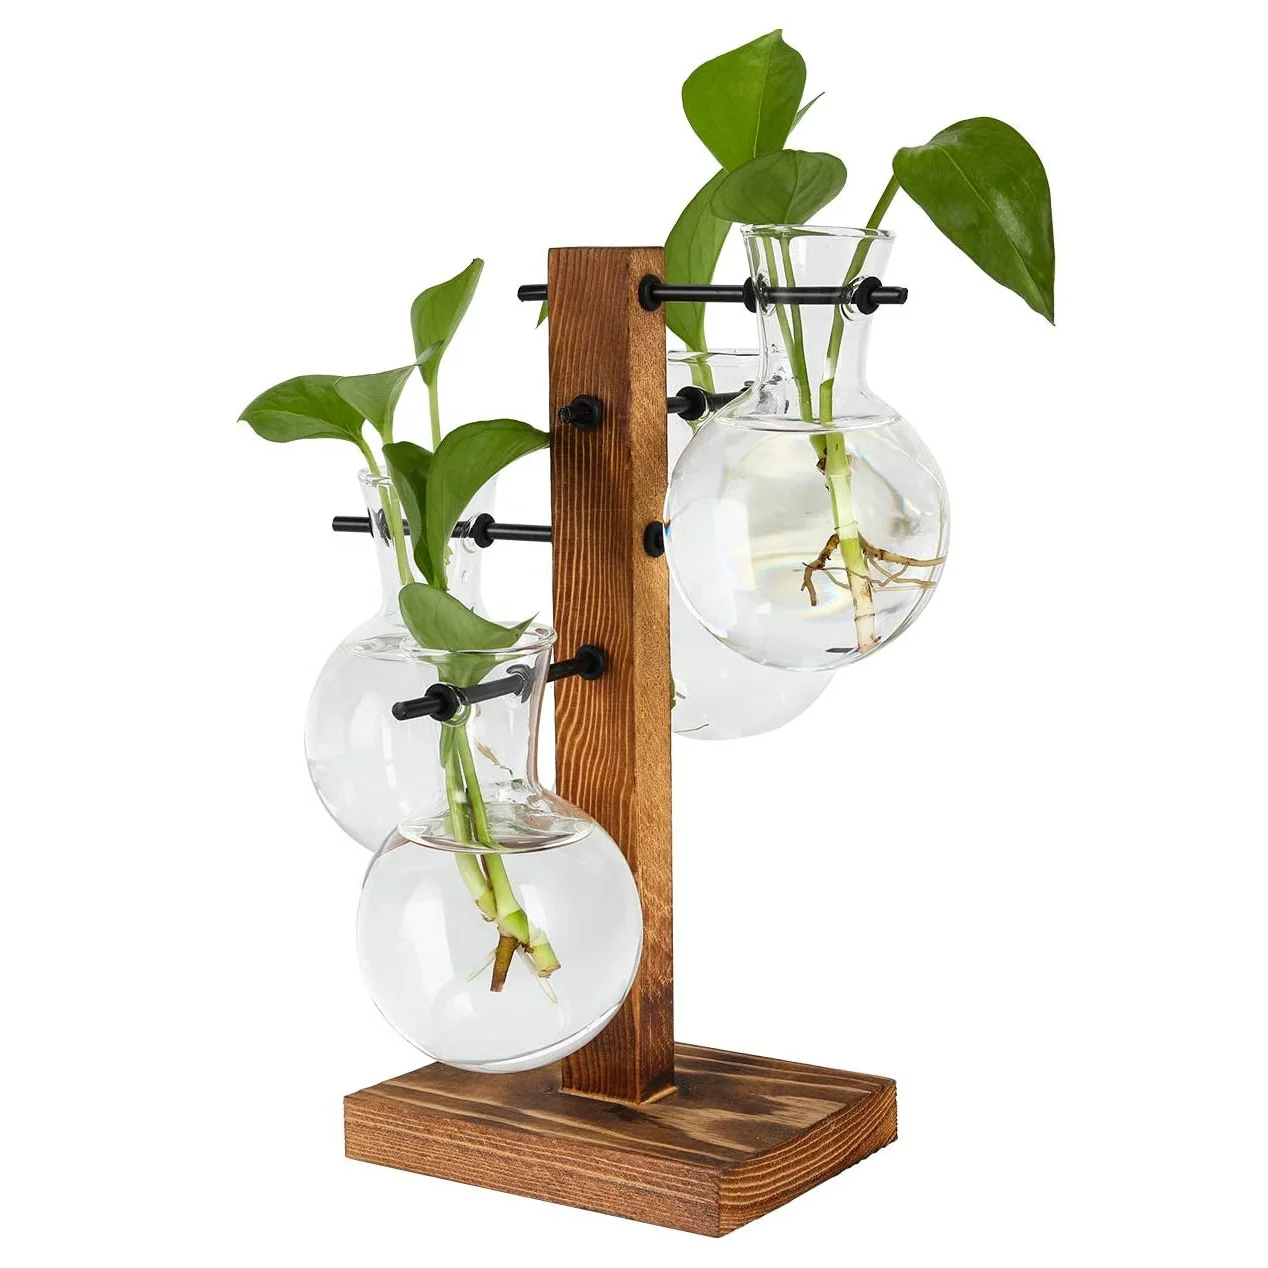 

Amazon Glass Planter Bulb Vase, Desktop Hydroponics Plant Terrarium with Retro Solid Wooden Stand and Metal Swivel Holder, Clear transparent